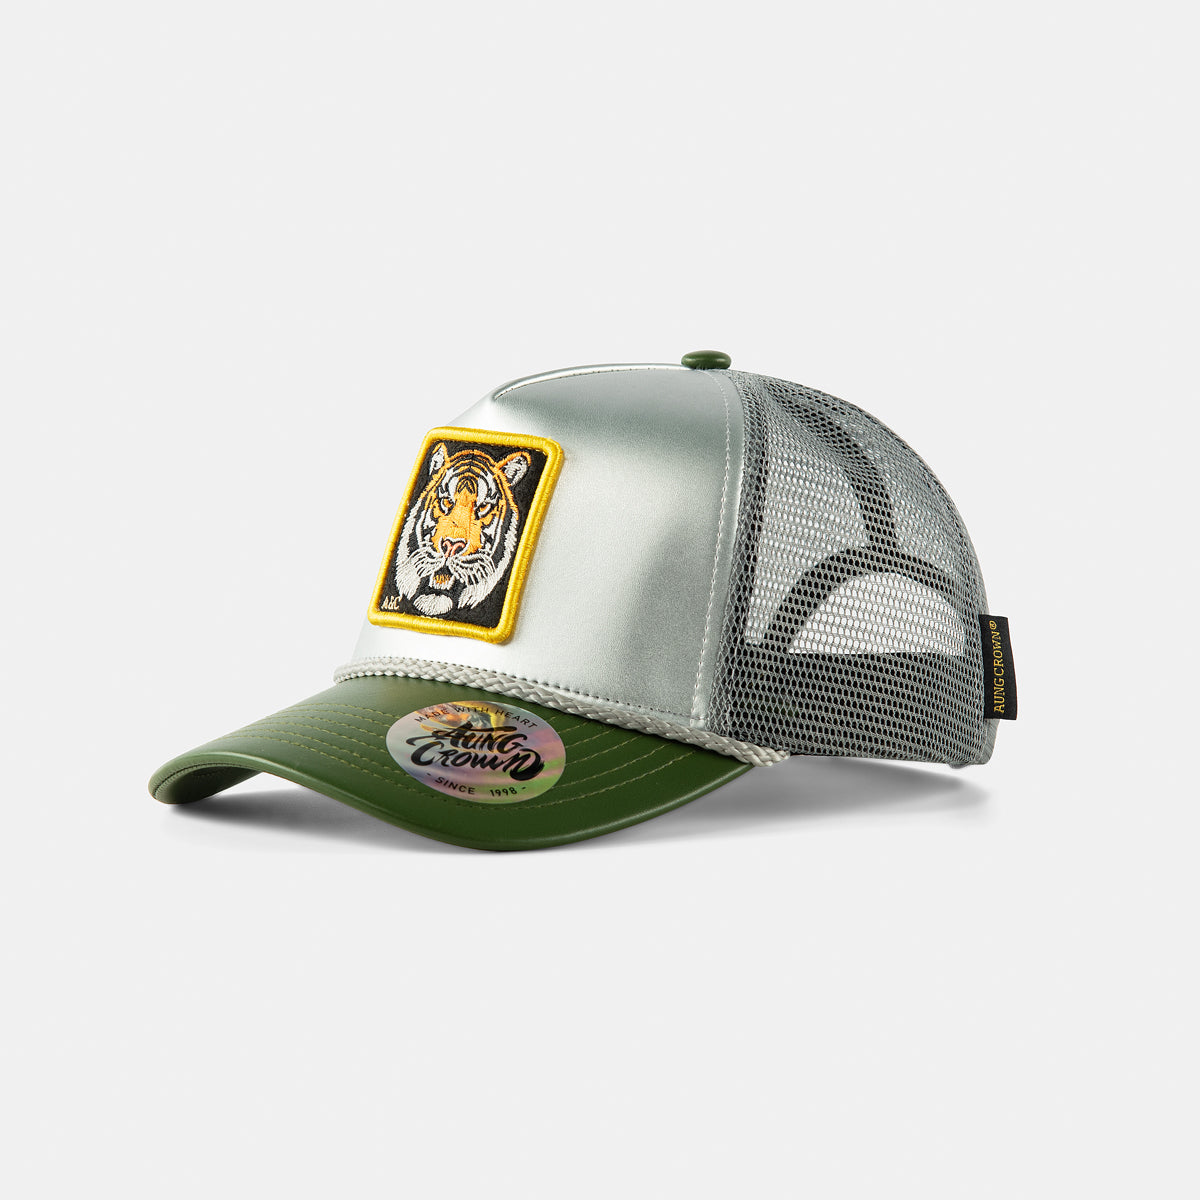 Tiger embroidery patch PU trucker hat